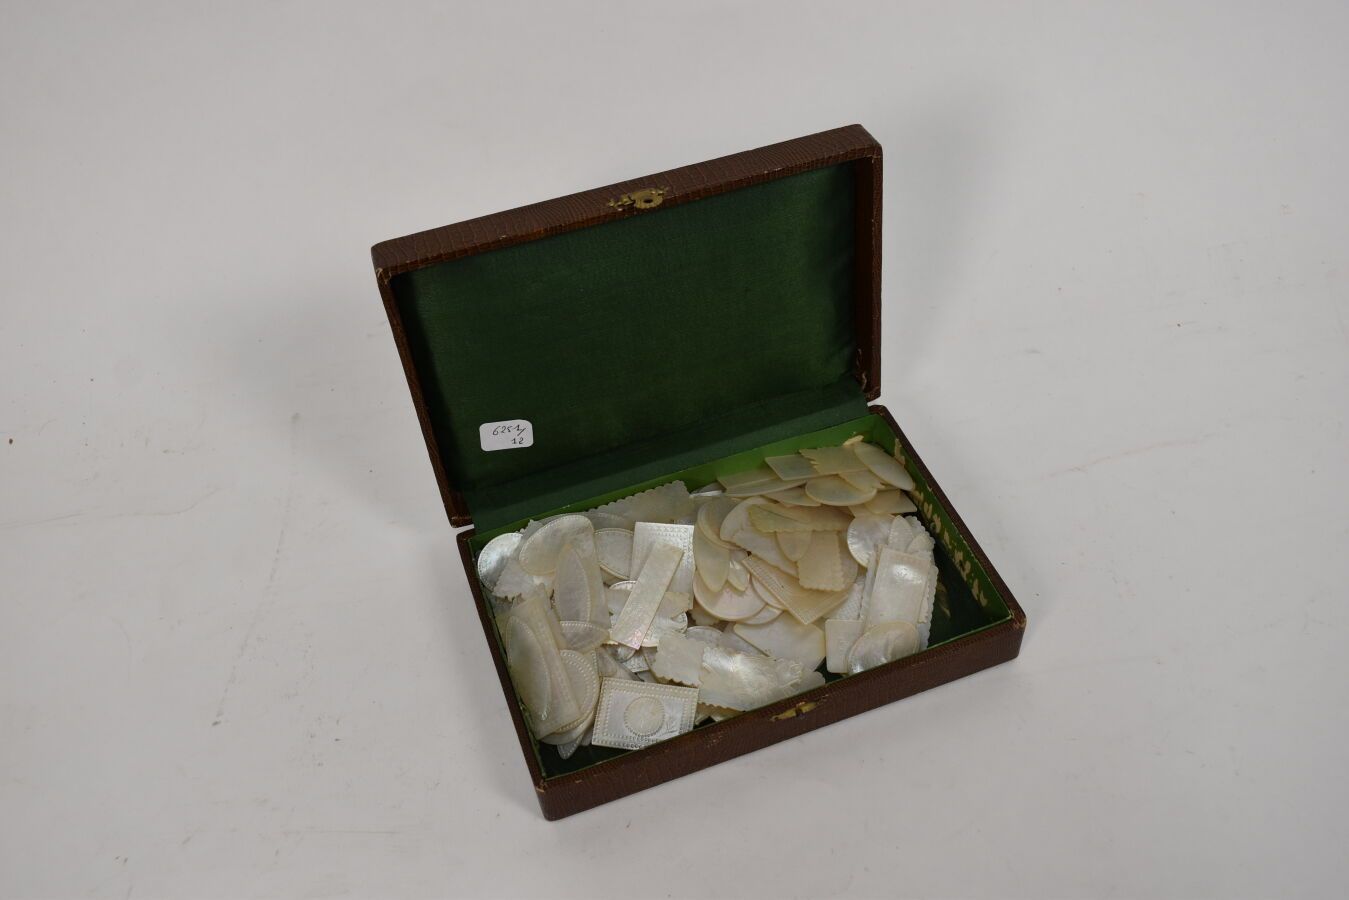 Null Set of mother of pearl engraved game tokens, monogrammed in its box.